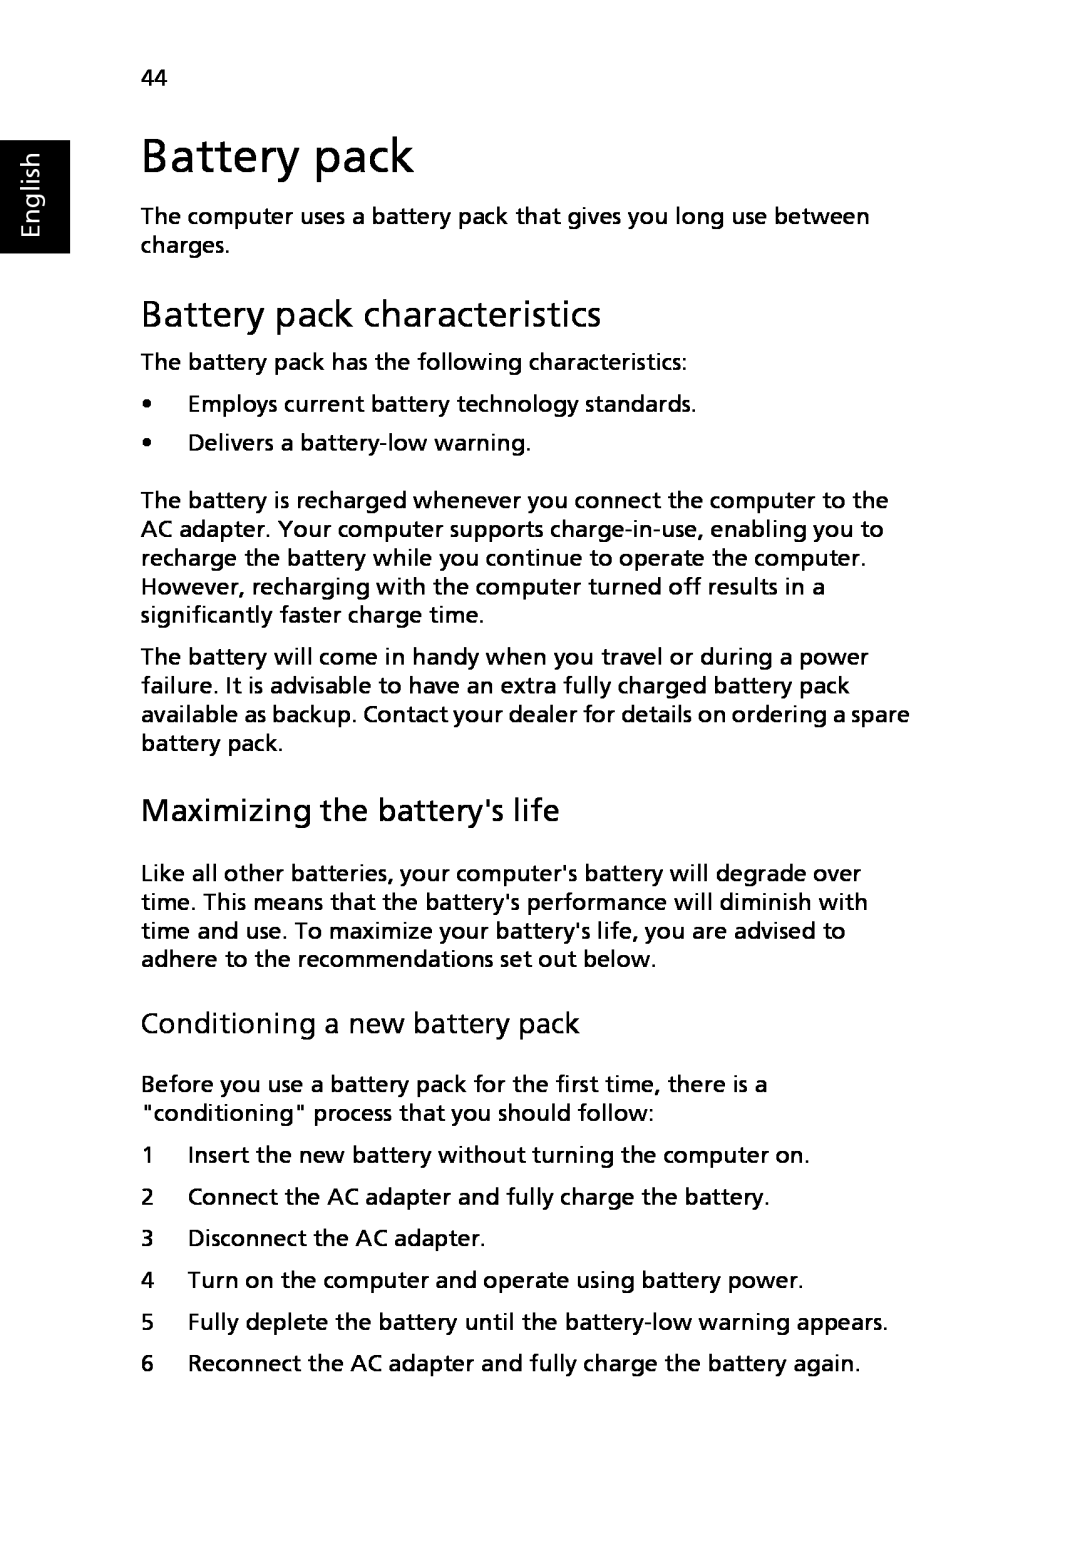 Acer 6492G manual Battery pack characteristics, Maximizing the batterys life, Conditioning a new battery pack, English 